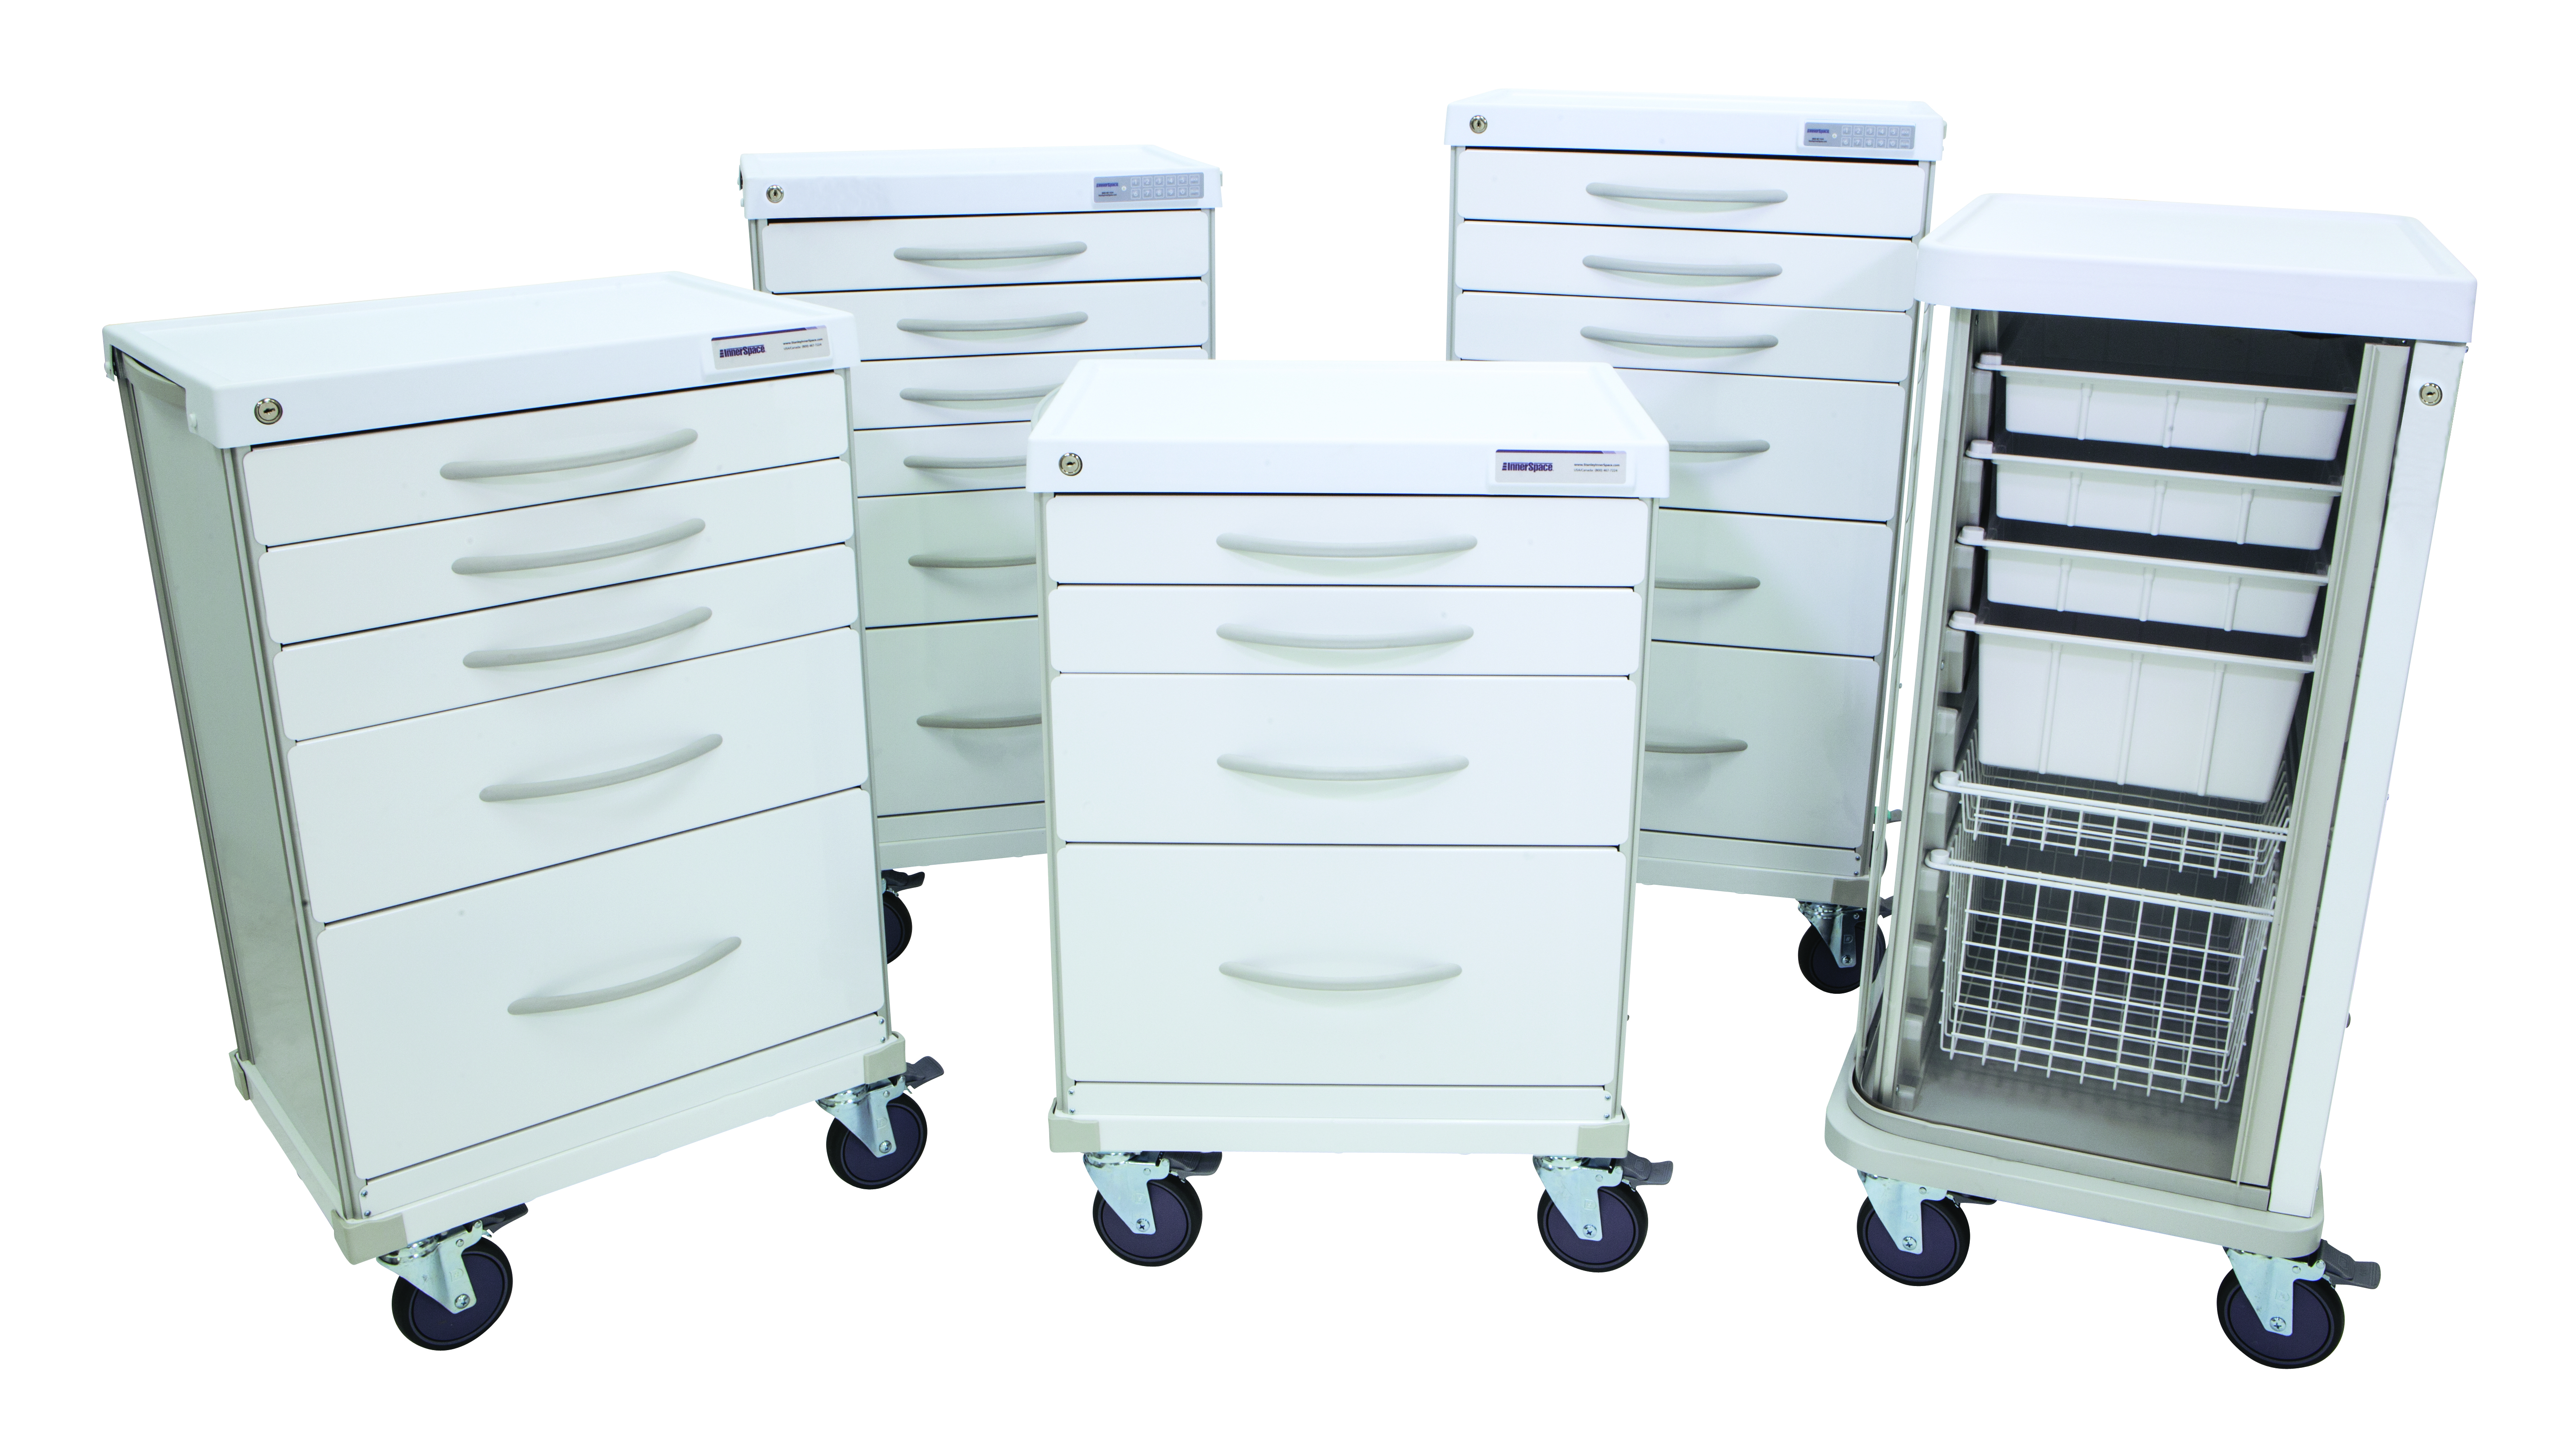 Four things to consider when selecting a small cart solution